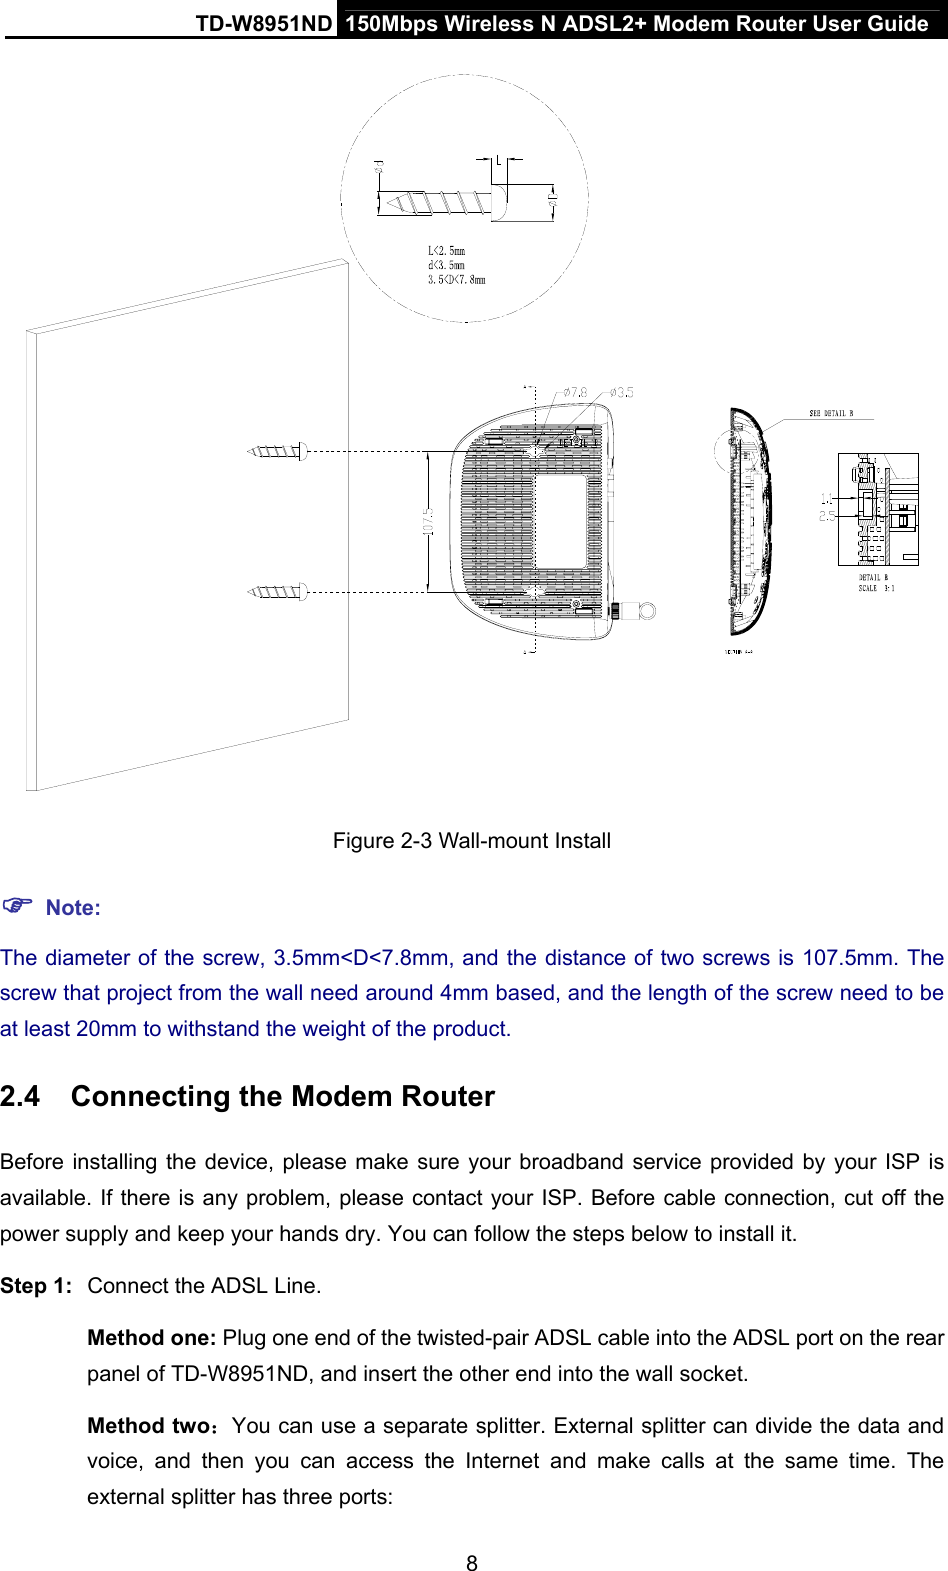 TD-W8951ND  150Mbps Wireless N ADSL2+ Modem Router User Guide  Figure 2-3 Wall-mount Install  Note: The diameter of the screw, 3.5mm&lt;D&lt;7.8mm, and the distance of two screws is 107.5mm. The screw that project from the wall need around 4mm based, and the length of the screw need to be at least 20mm to withstand the weight of the product. 2.4  Connecting the Modem Router Before installing the device, please make sure your broadband service provided by your ISP is available. If there is any problem, please contact your ISP. Before cable connection, cut off the power supply and keep your hands dry. You can follow the steps below to install it. Step 1:  Connect the ADSL Line. Method one: Plug one end of the twisted-pair ADSL cable into the ADSL port on the rear panel of TD-W8951ND, and insert the other end into the wall socket. Method two：You can use a separate splitter. External splitter can divide the data and voice, and then you can access the Internet and make calls at the same time. The external splitter has three ports: 8 